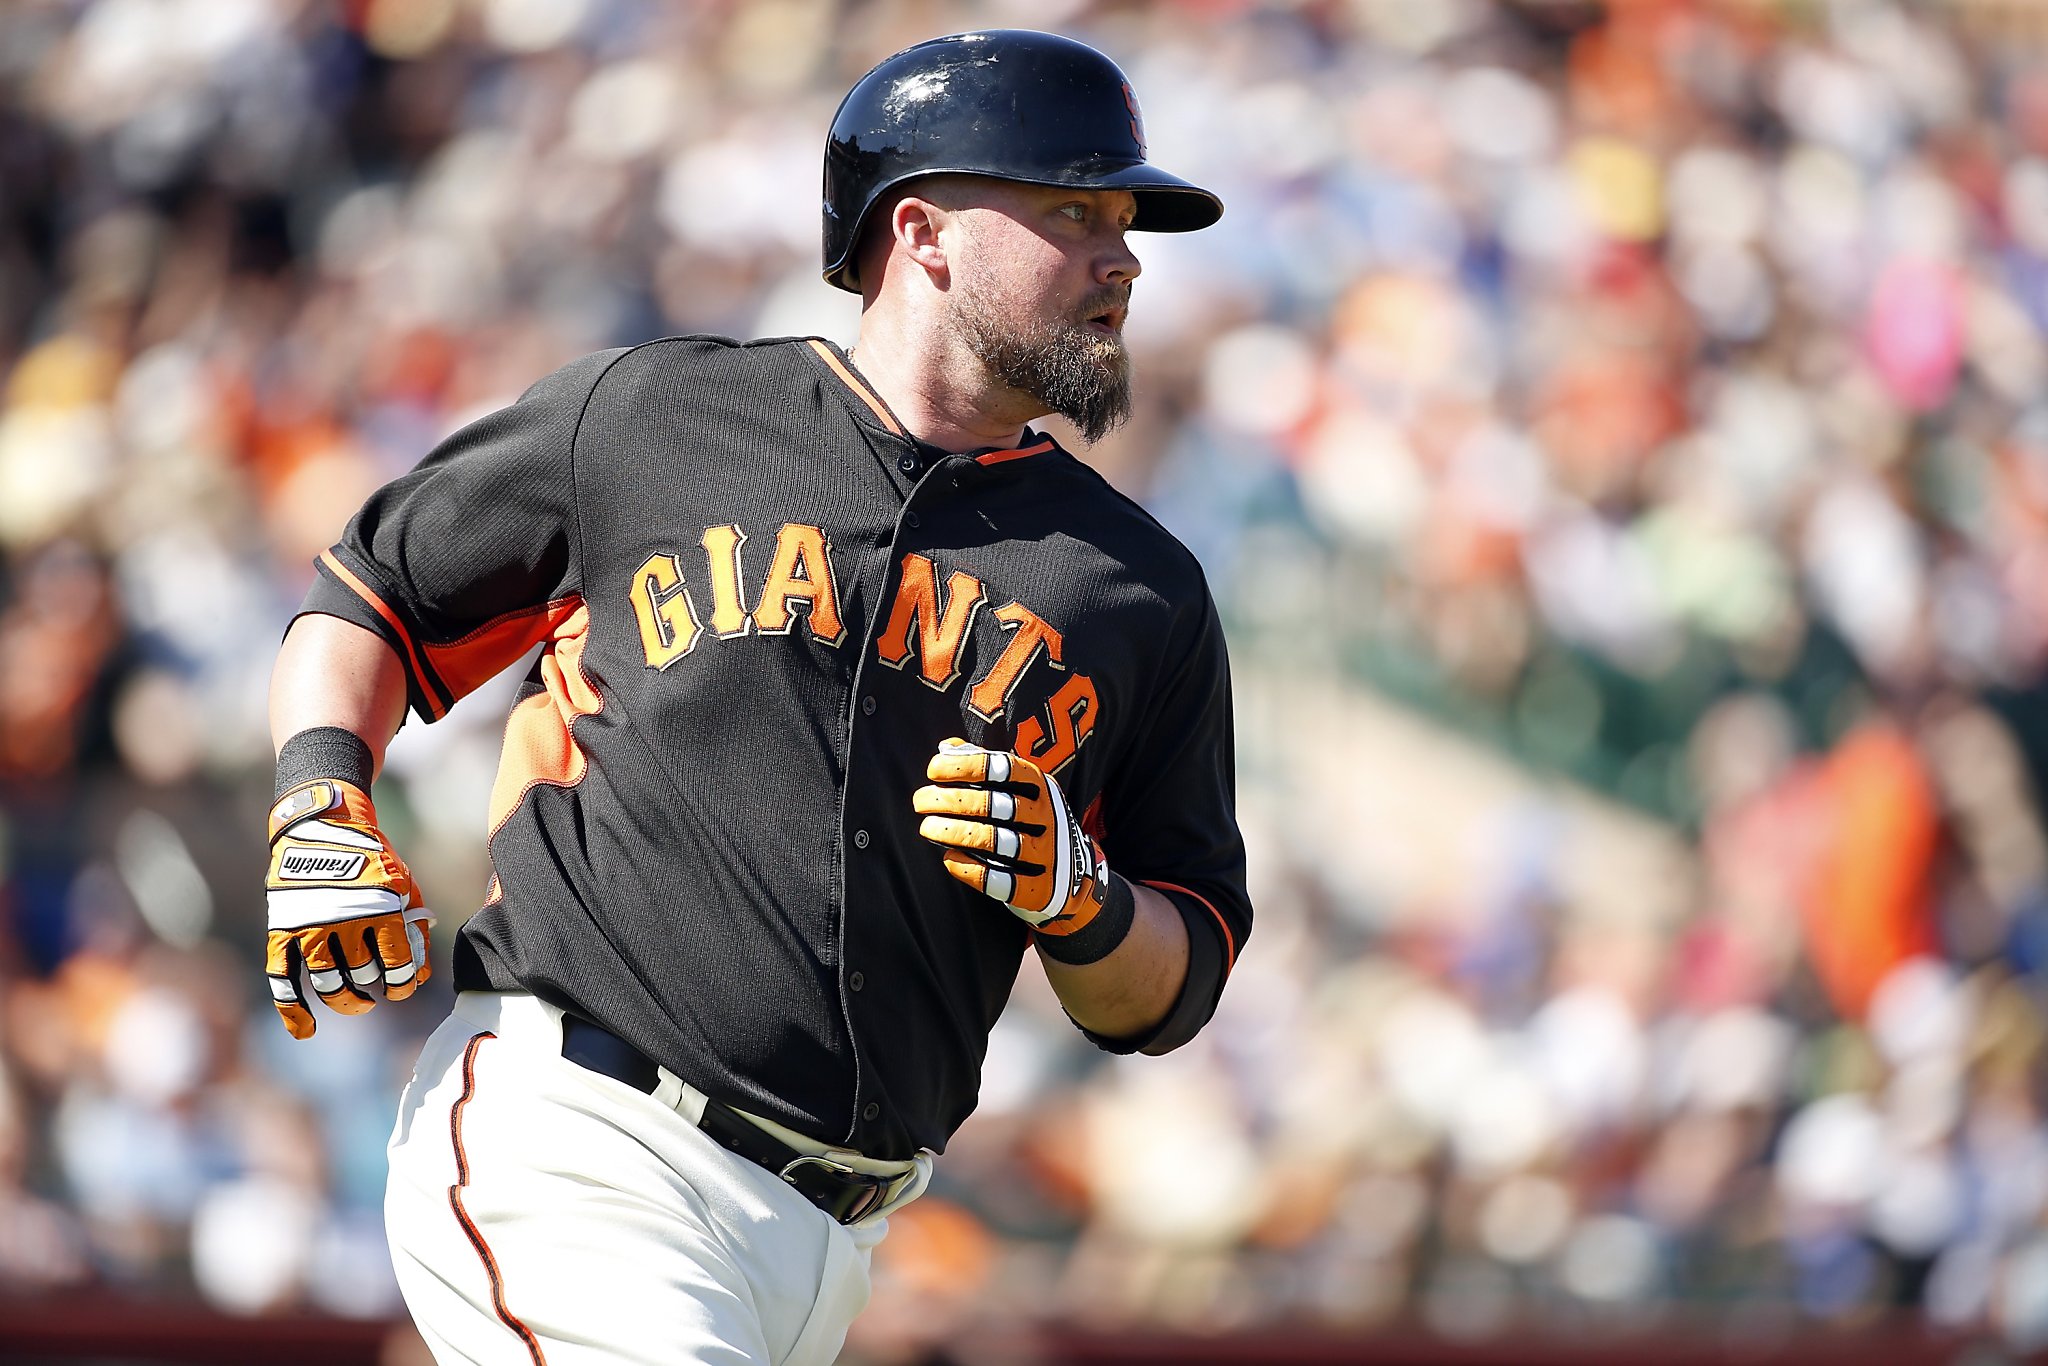 Casey McGehee faces pressure of replacing Sandoval with Giants